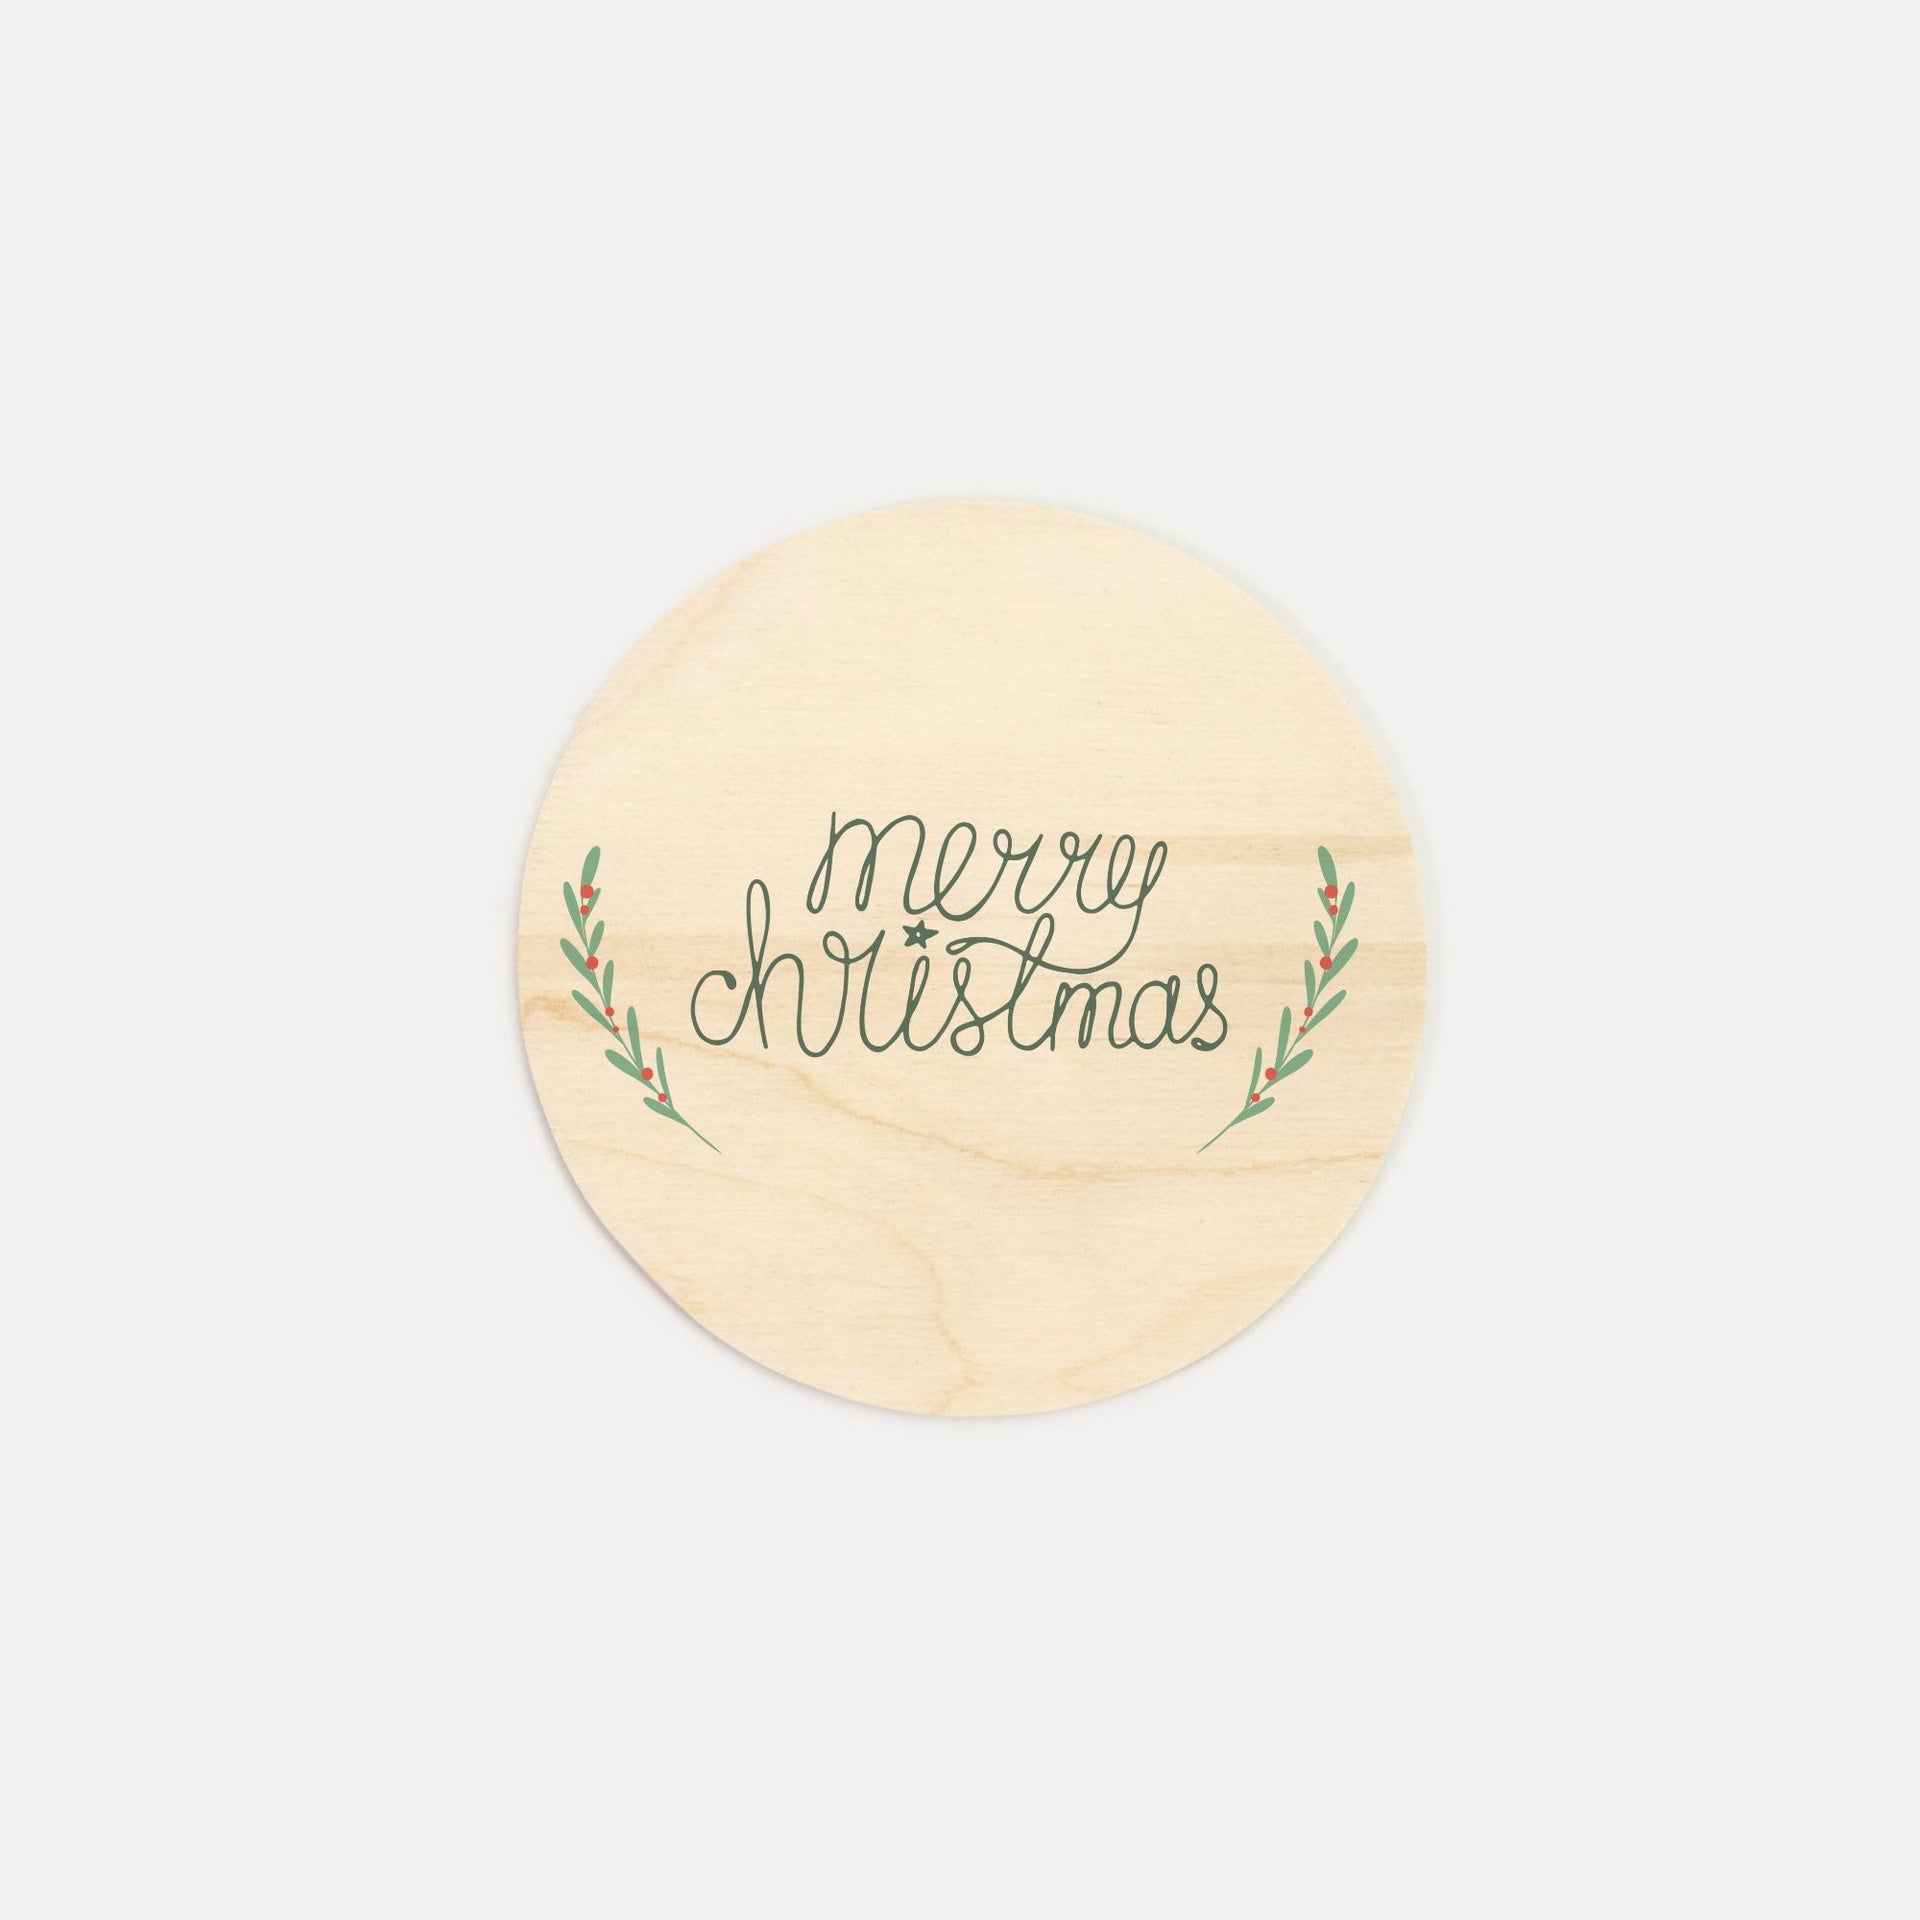 6" Round Wood Sign - Merry Christmas